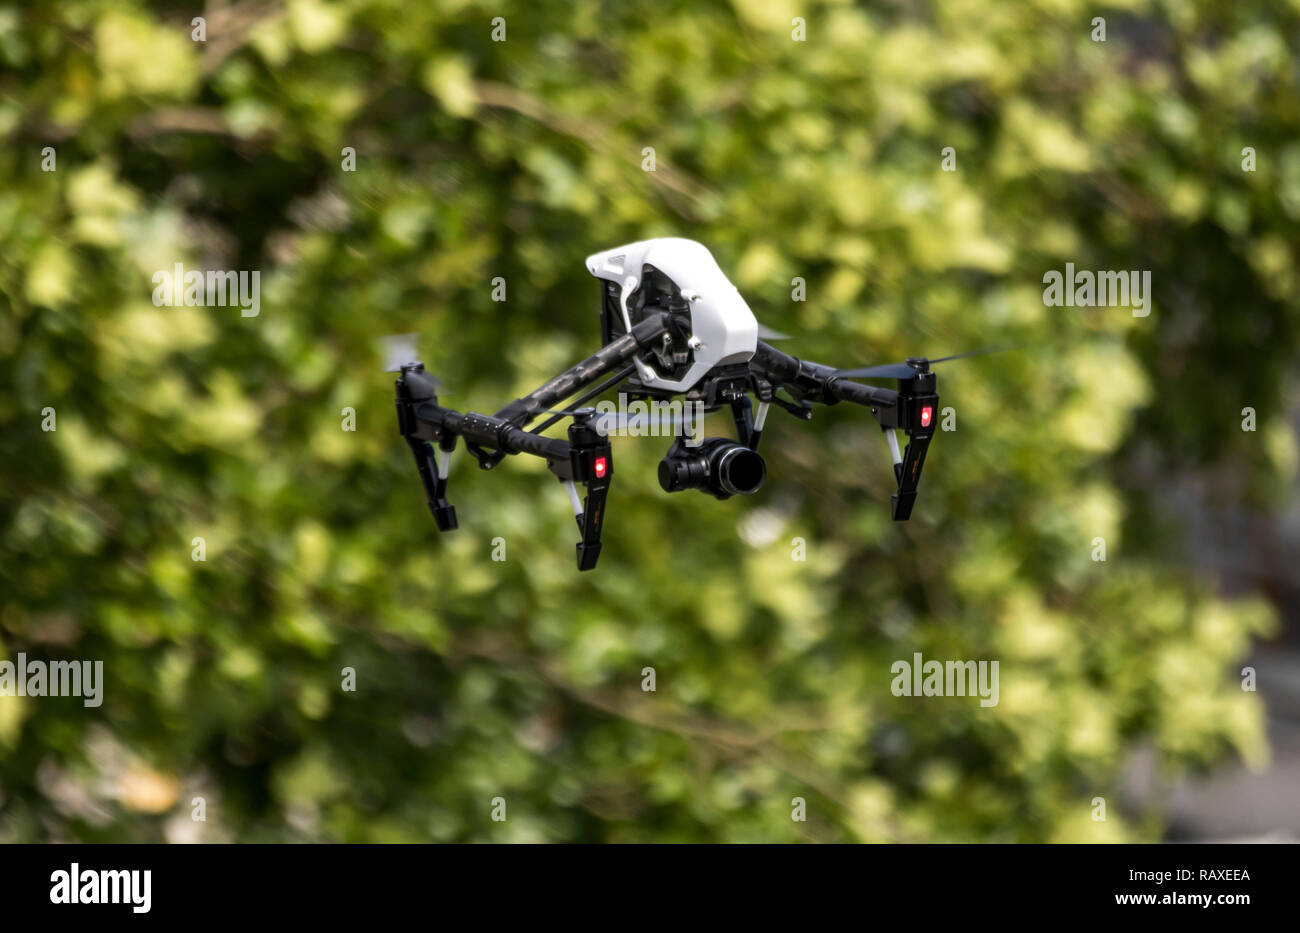 Drone, Multicopter, with Camera, Quadrocopter, Model DJI Inspire 1, Stock Photo